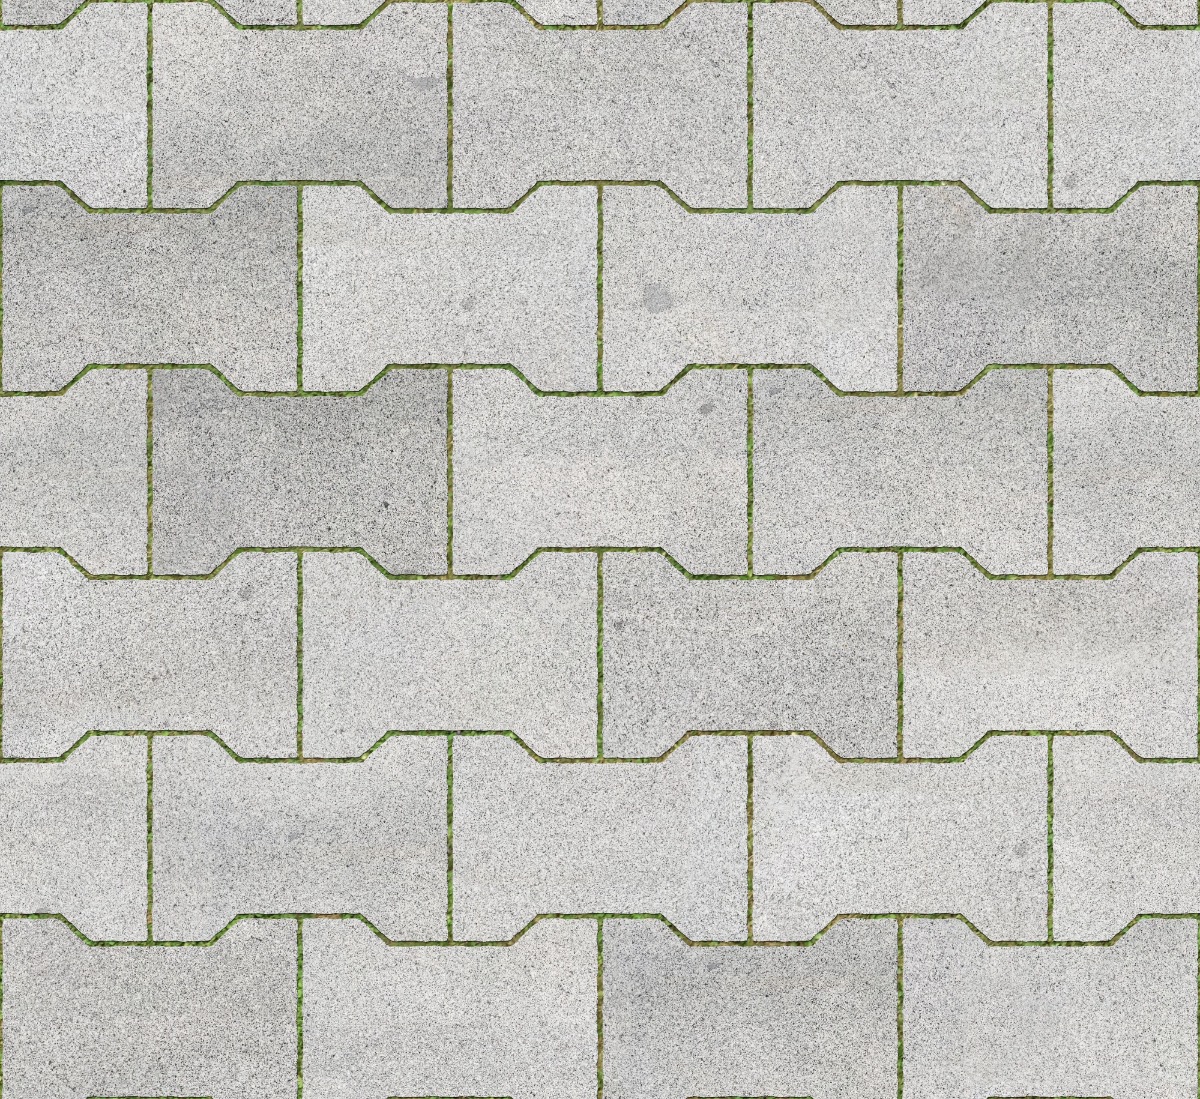 A seamless stone texture with granite blocks arranged in a Bowtie Pavers pattern